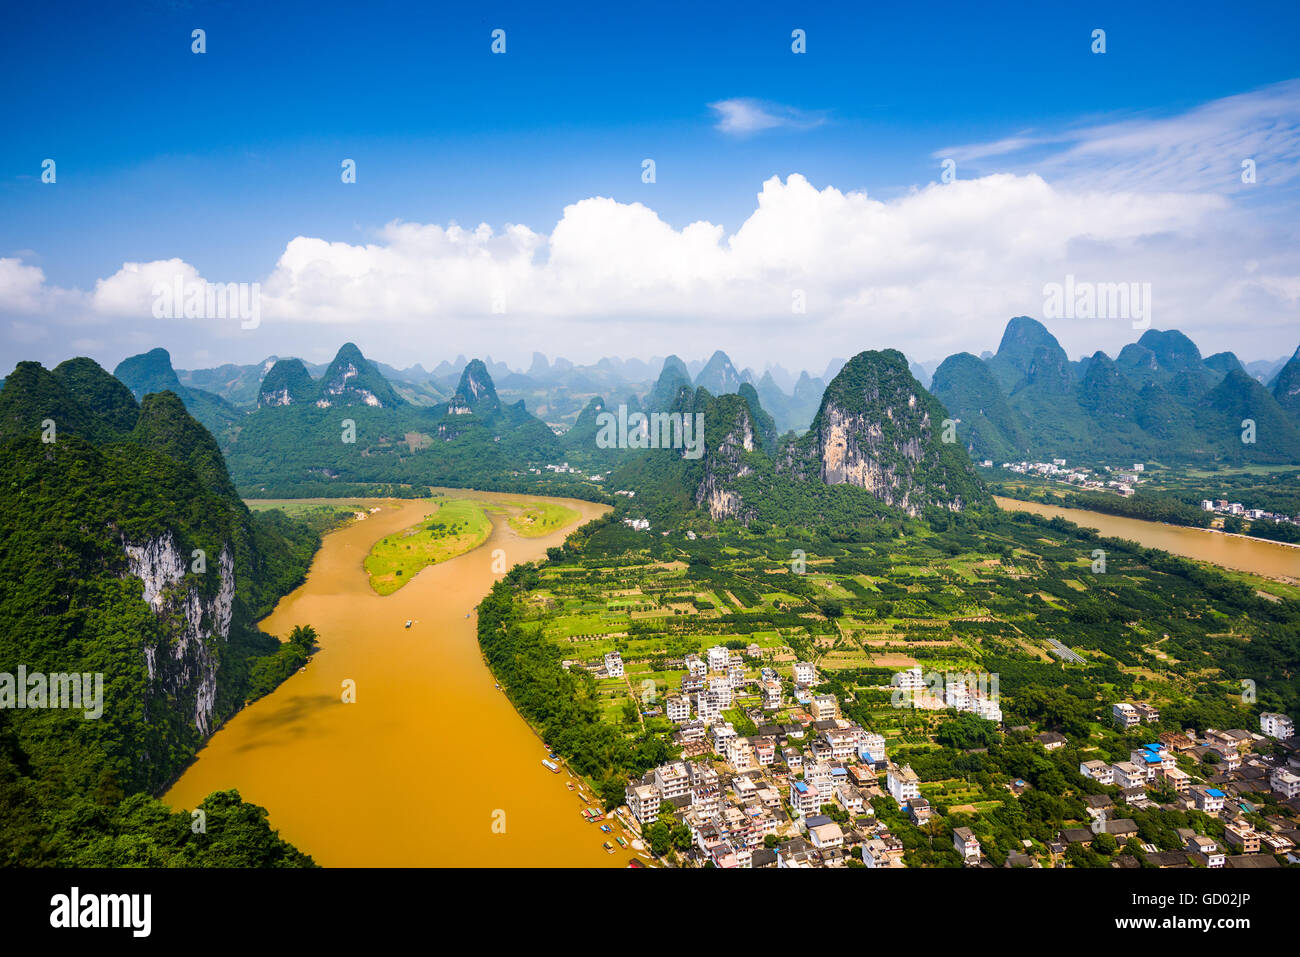 Karst Mountain landscape on the Li River in rural Guilin, Guangxi, China. Stock Photo